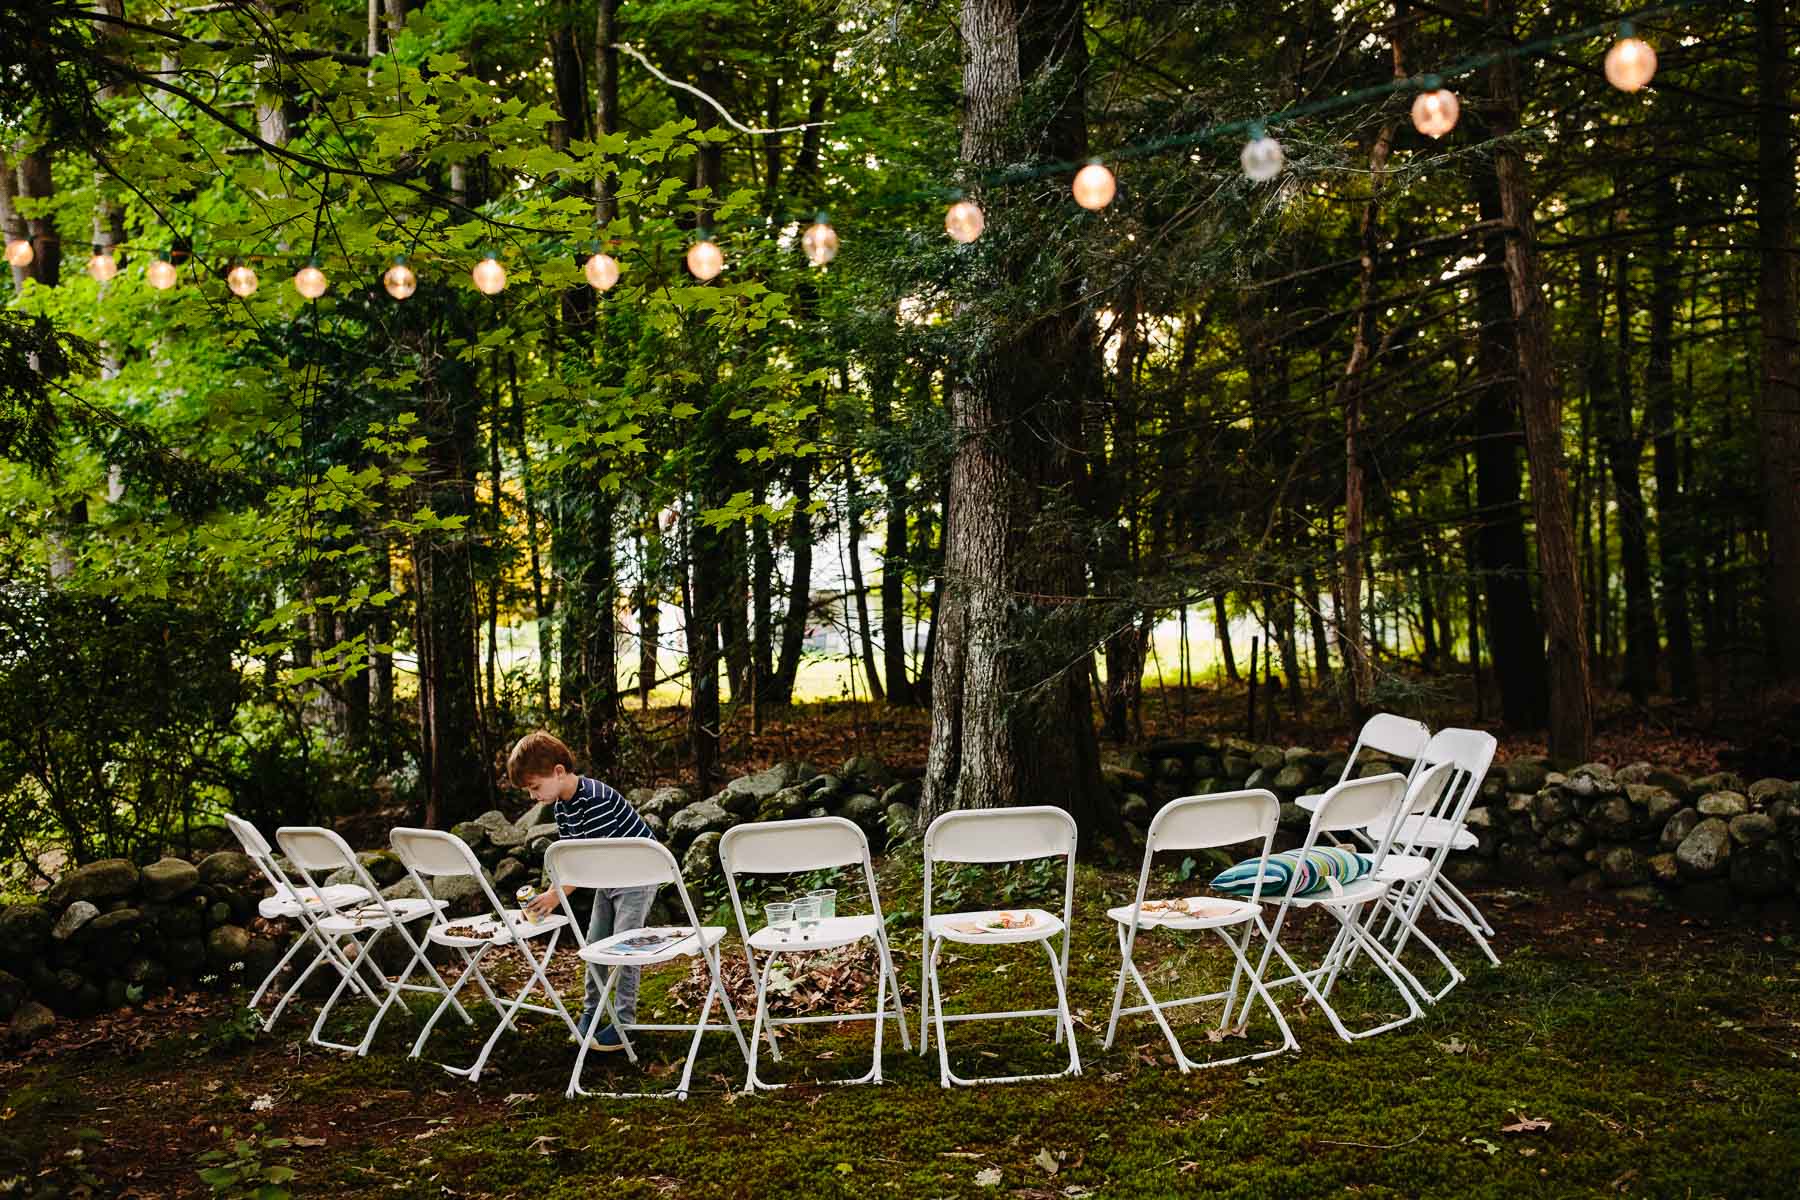 a child plays in the twilight during a backyard wedding reception | Kelly Benvenuto Photography